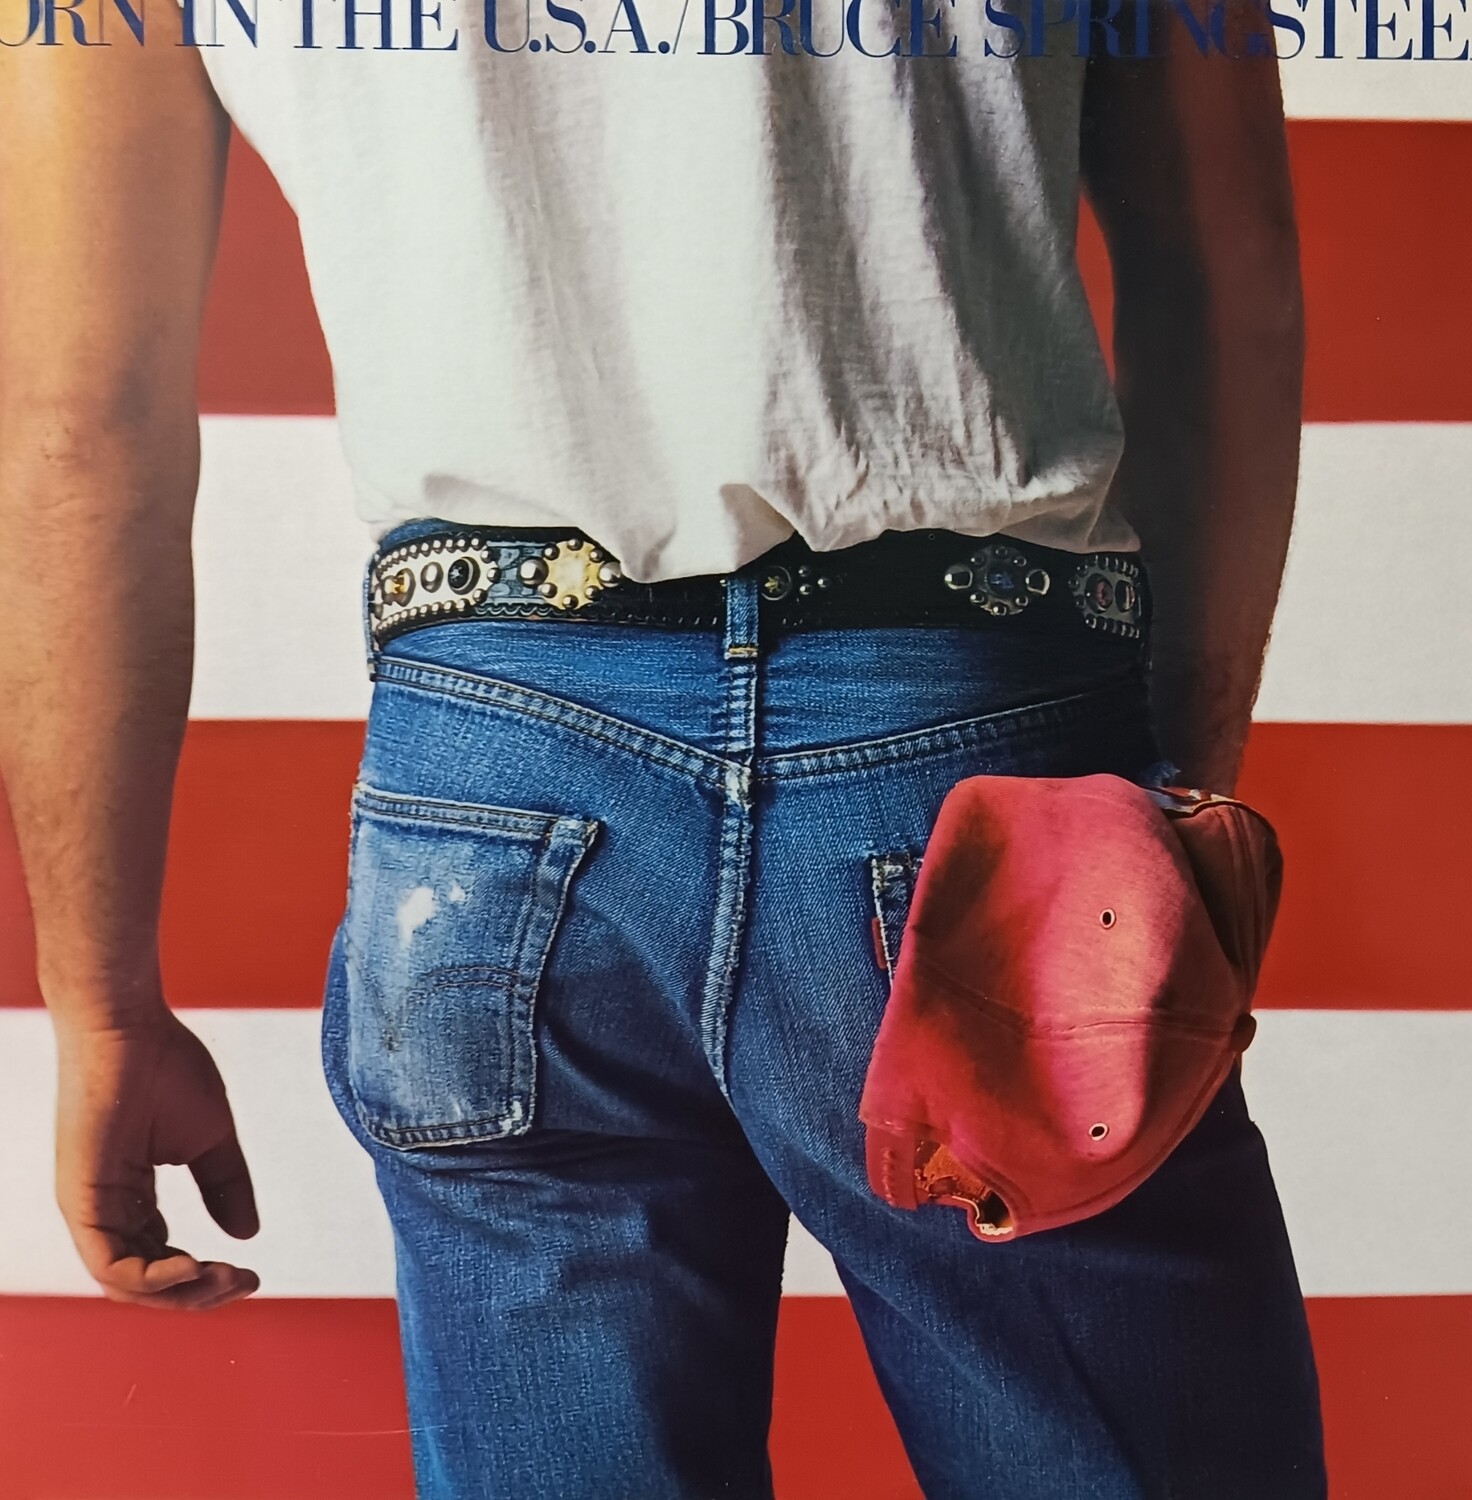 BRUCE SPRINGSTEEN - Born in the USA